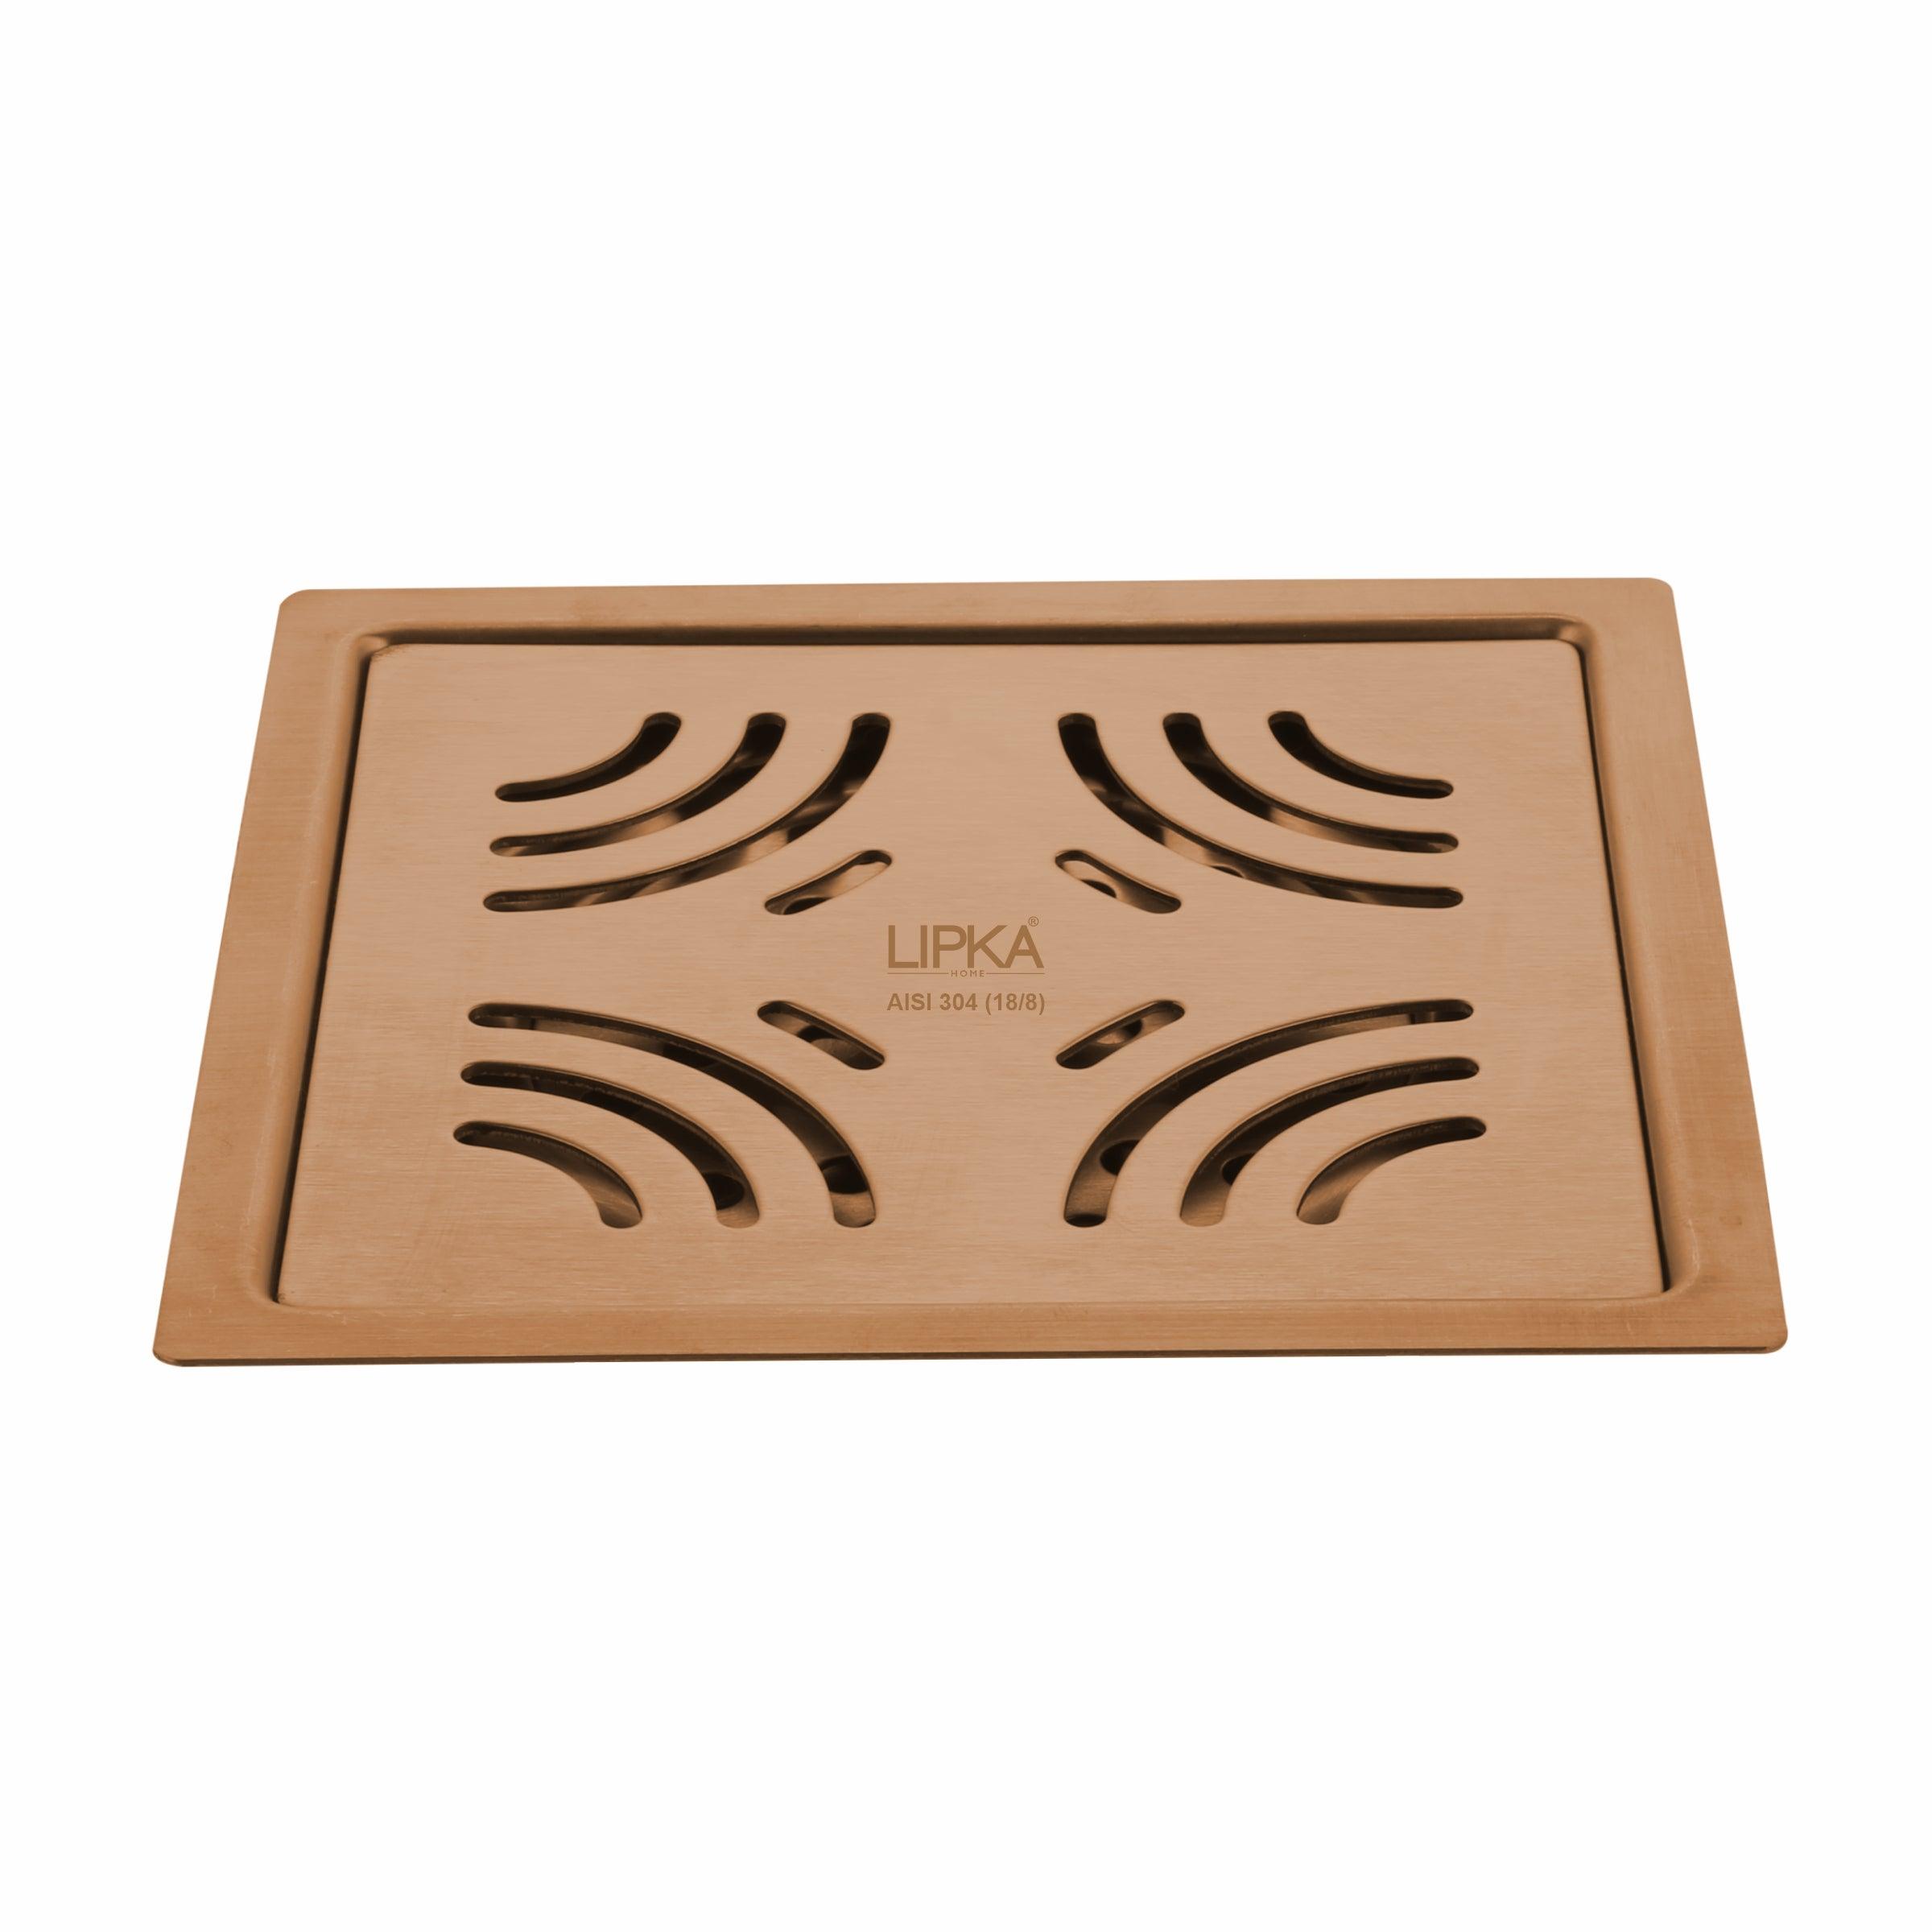 Purple Exclusive Square Flat Cut Floor Drain in Antique Copper PVD Coating (5 x 5 Inches)